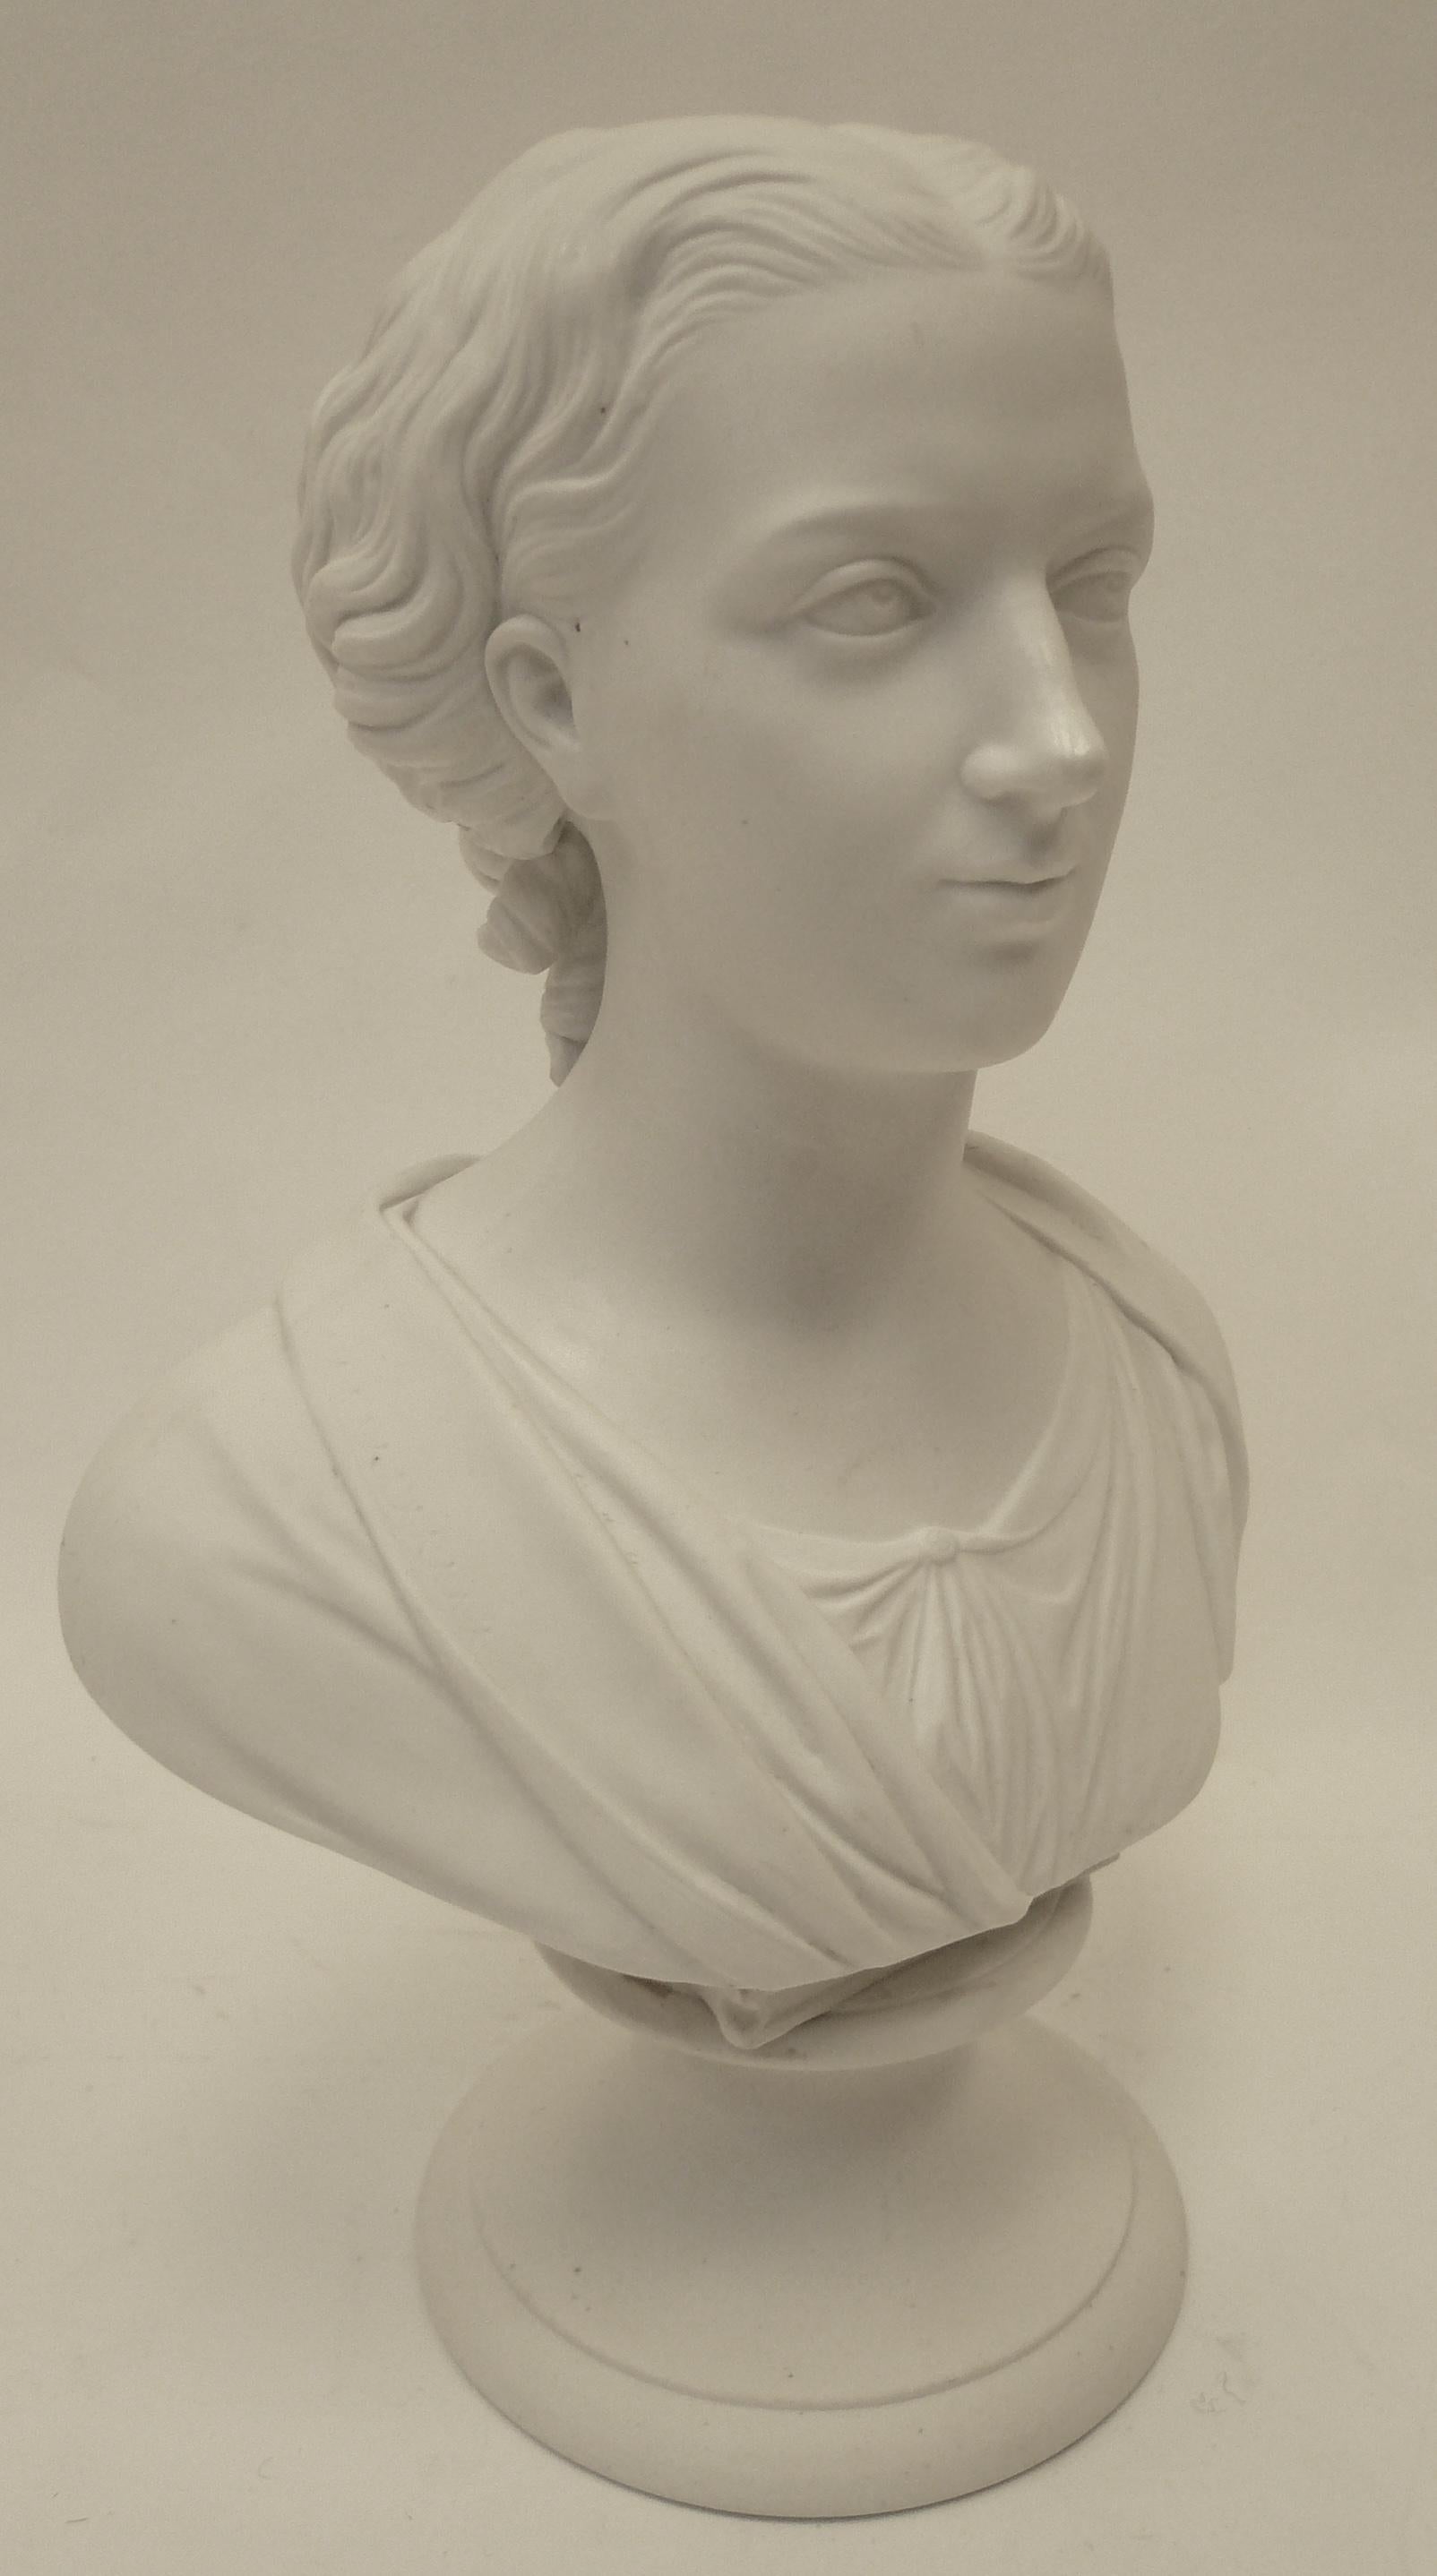 This finely detailed parian porcelain bust of Eneret is artist signed and dated.